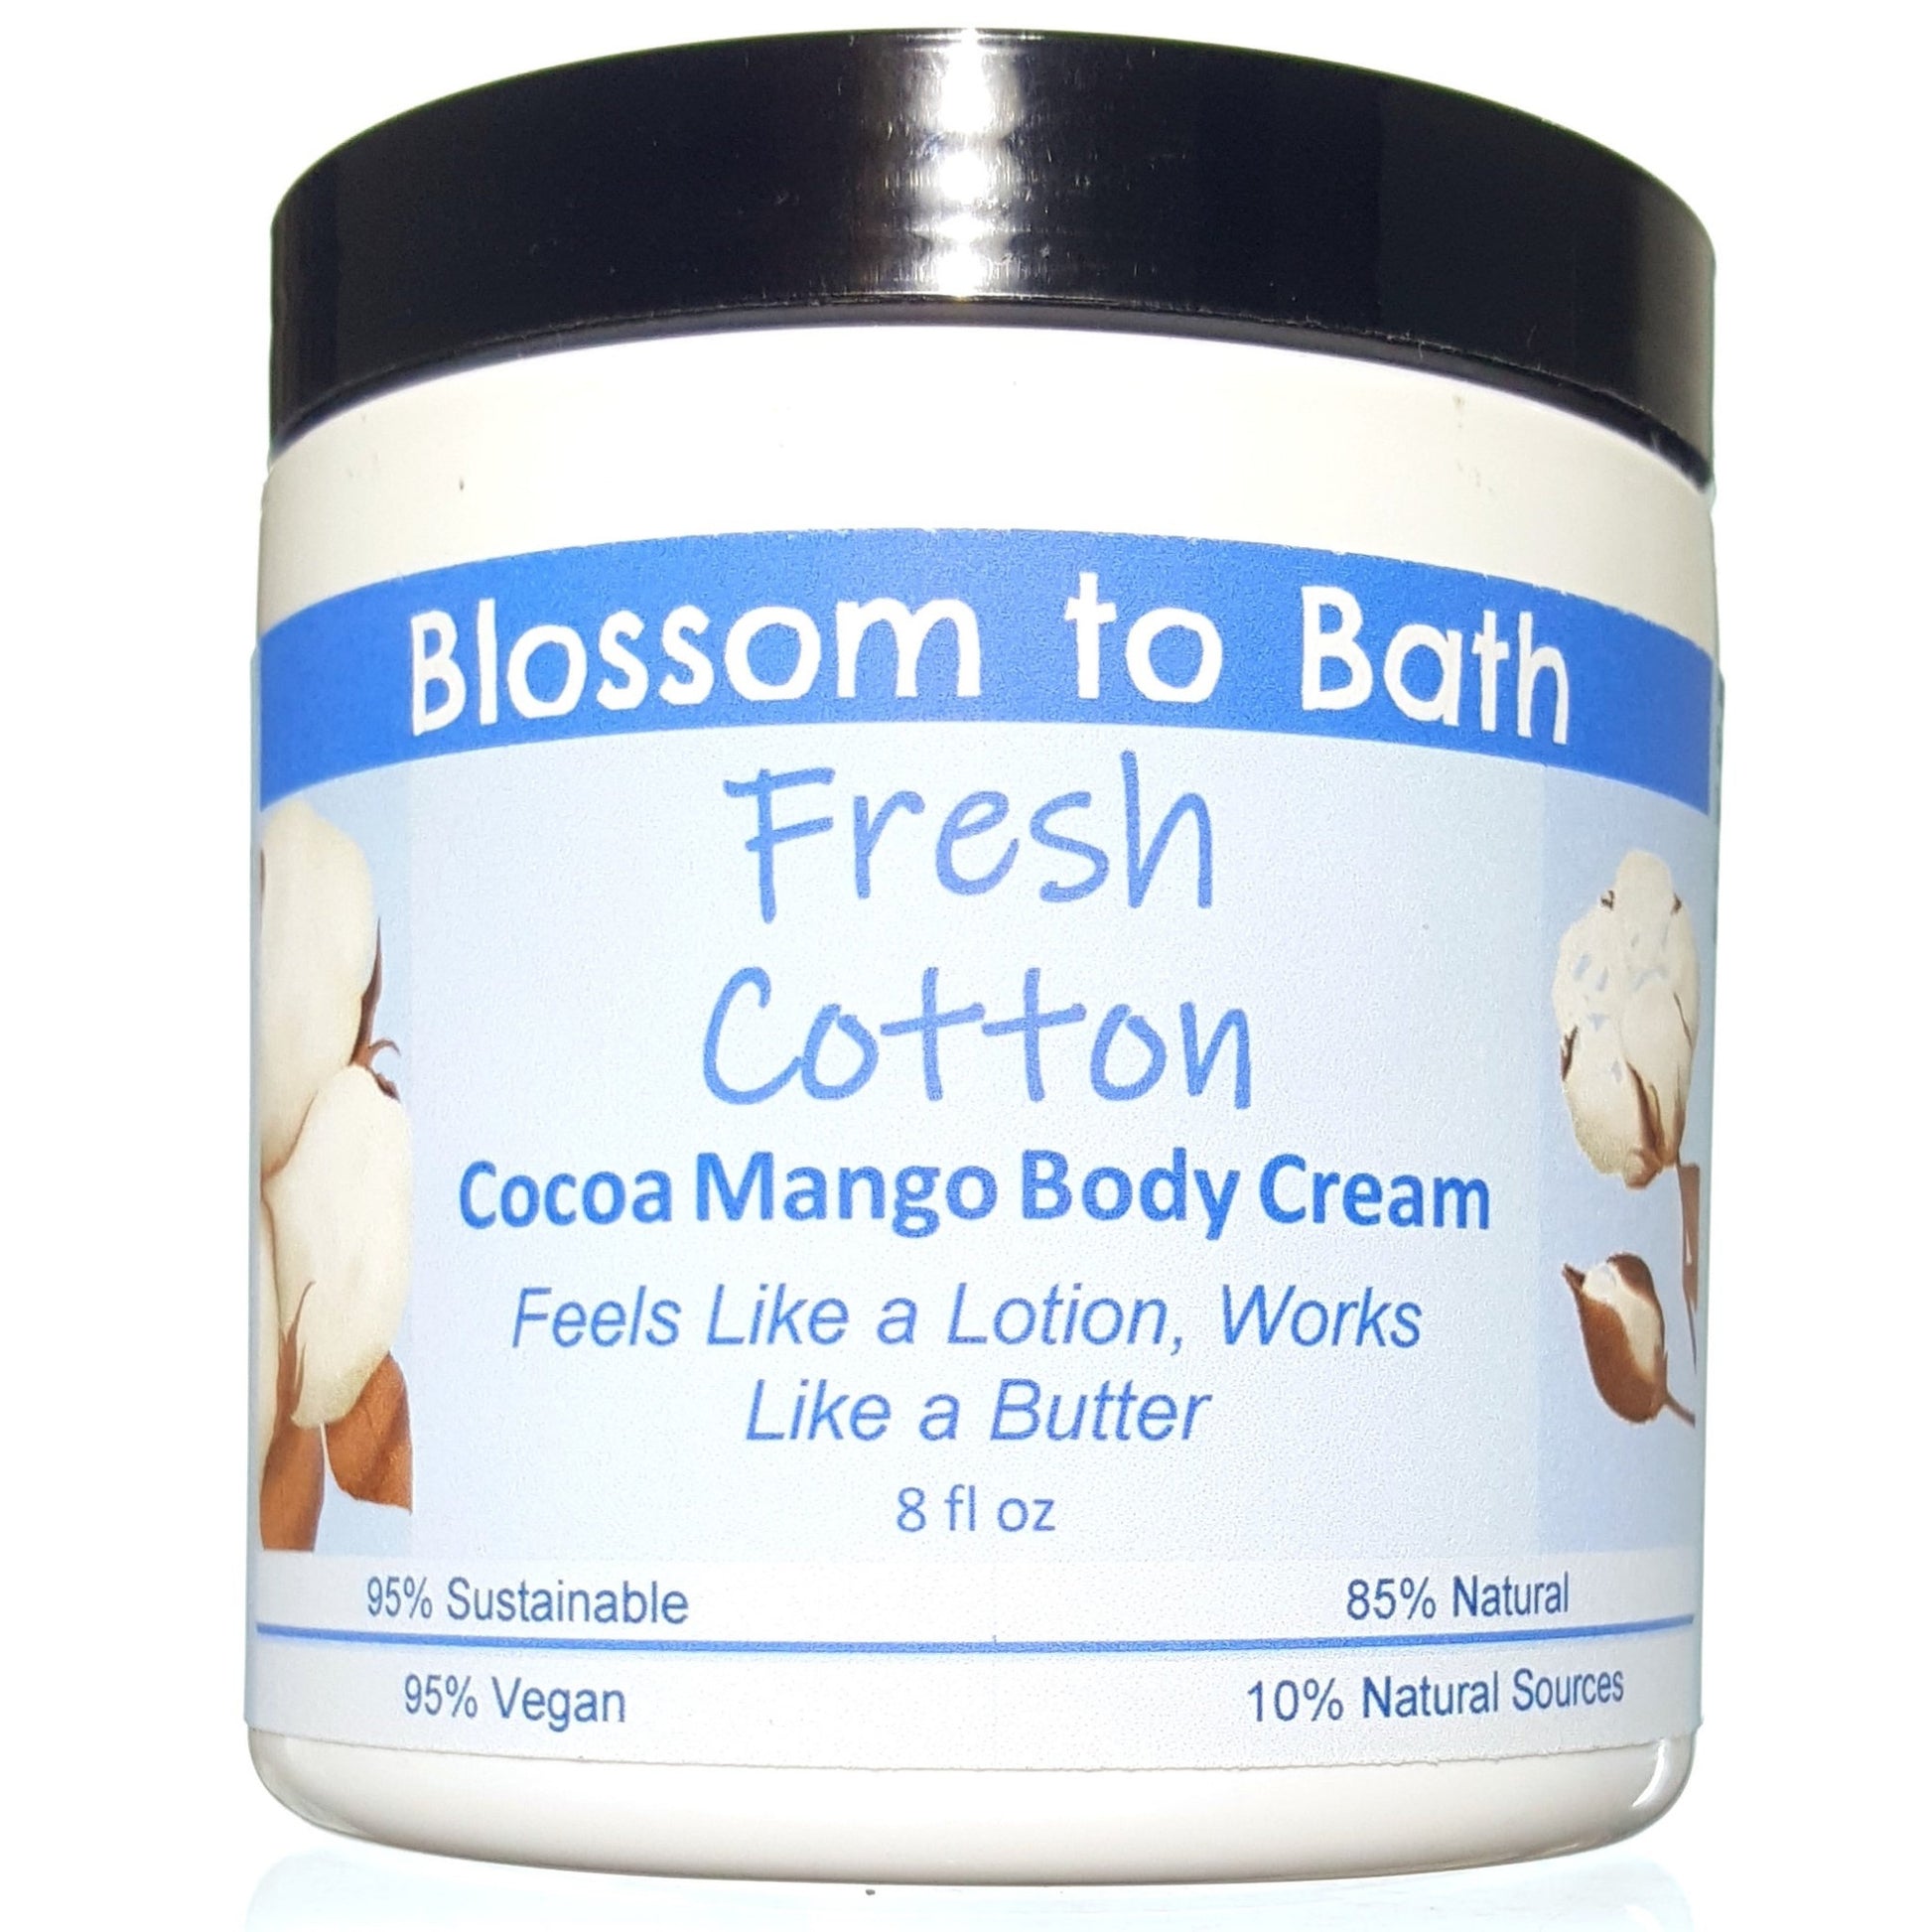 Buy Blossom to Bath Fresh Cotton Cocoa Mango Body Cream from Flowersong Soap Studio.  Rich organic butters  soften and moisturize even the roughest skin all day  Smells like clean sheets drying in a breeze of spring blossoms.